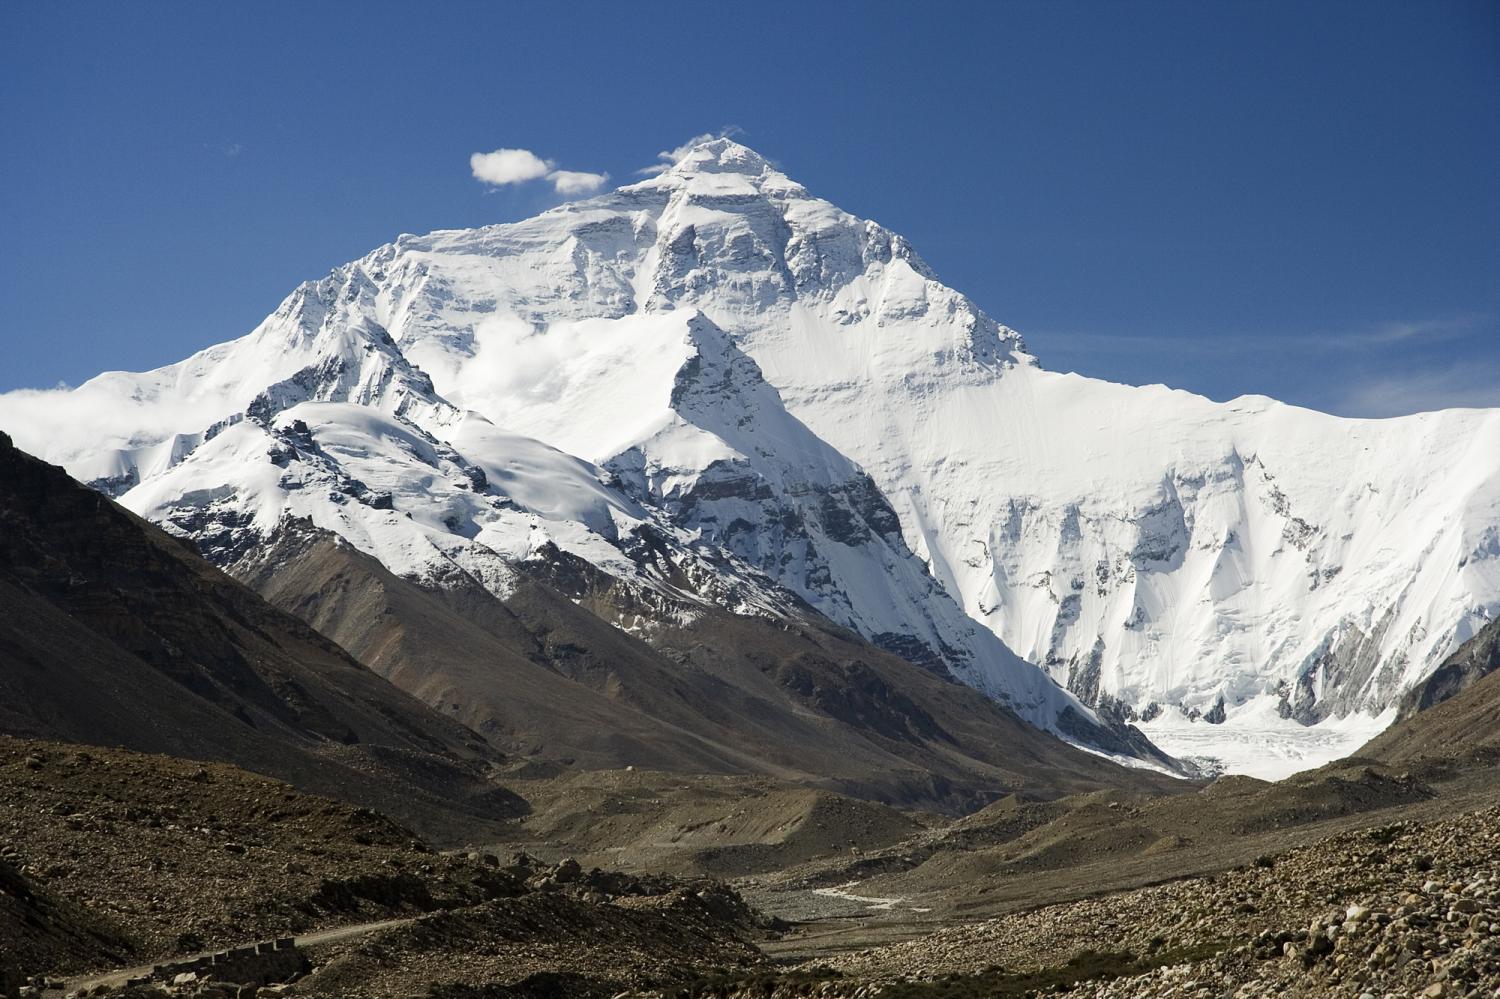 Bio gas to be yielded from human waste collected from Everest base camp